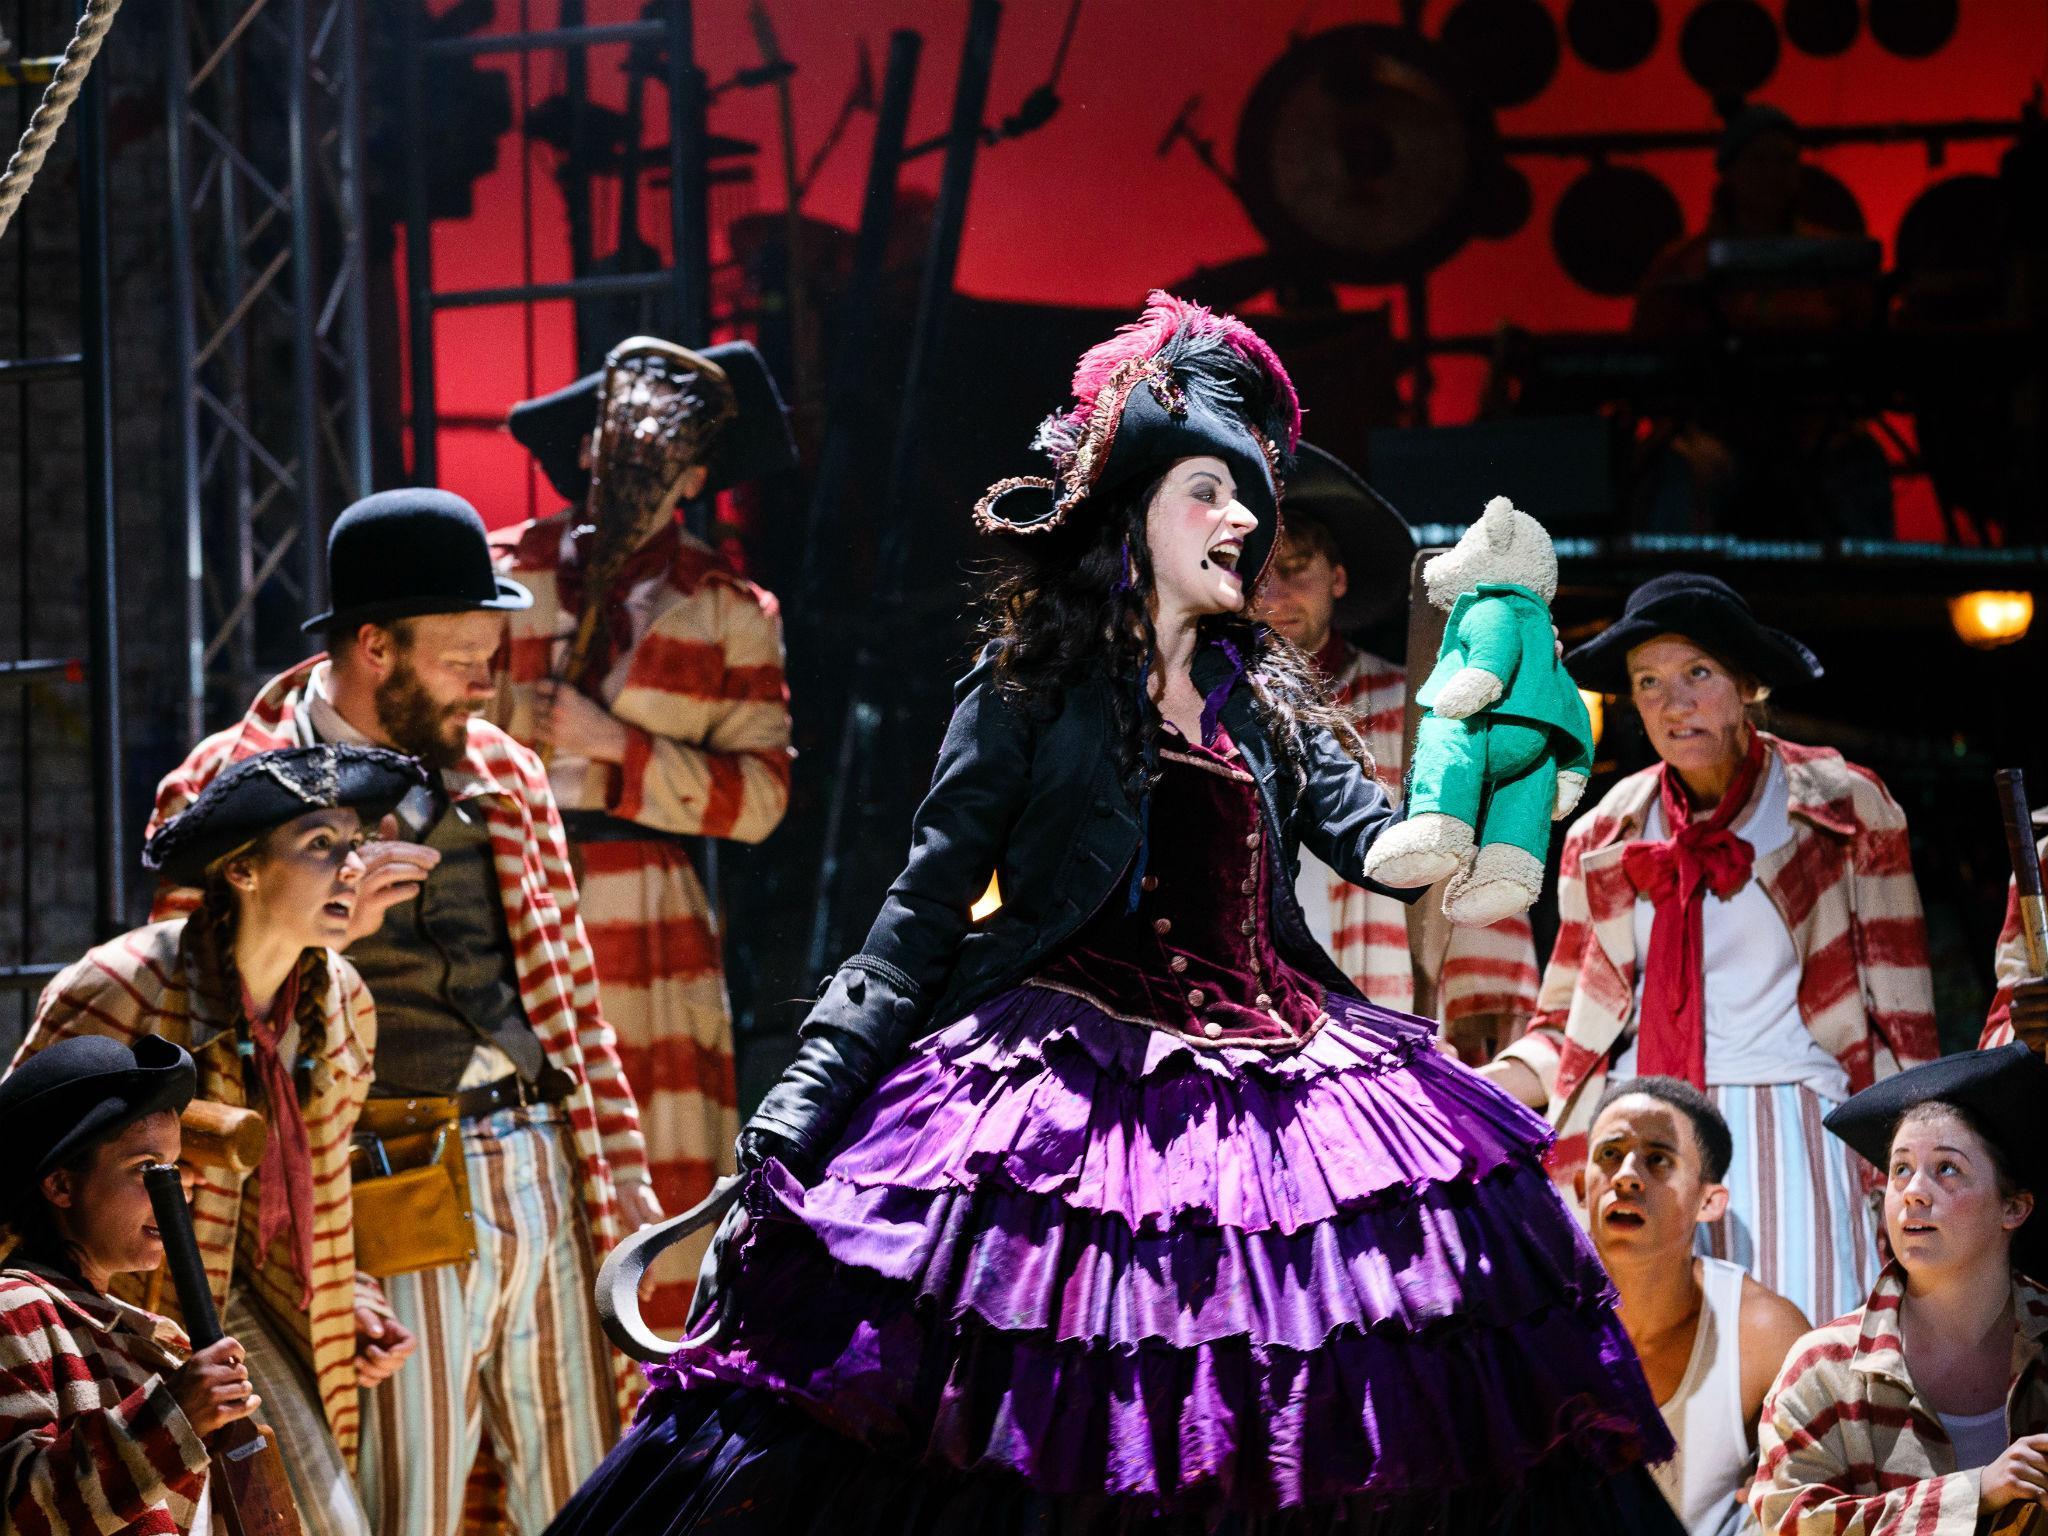 Anna Francolini as Captain Hook is a magnificently frightening and pathetic crone